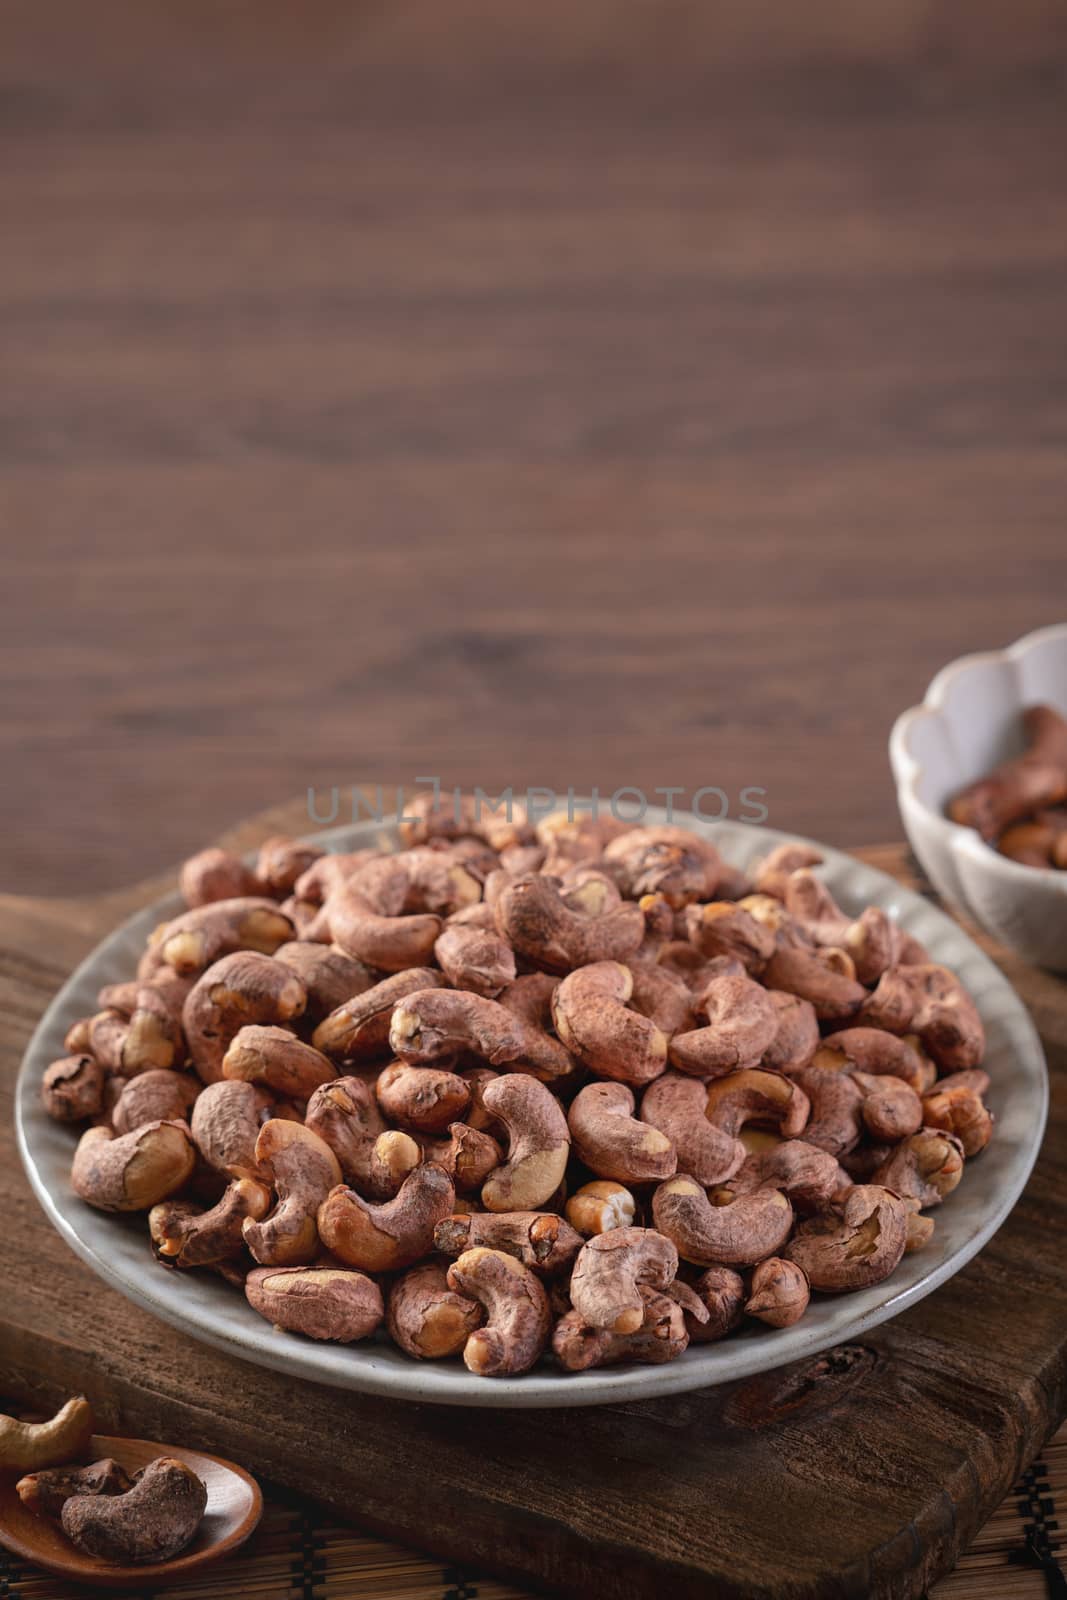 Cashew nuts with peel in a plate on wooden tray and table background, healthy raw food concept.